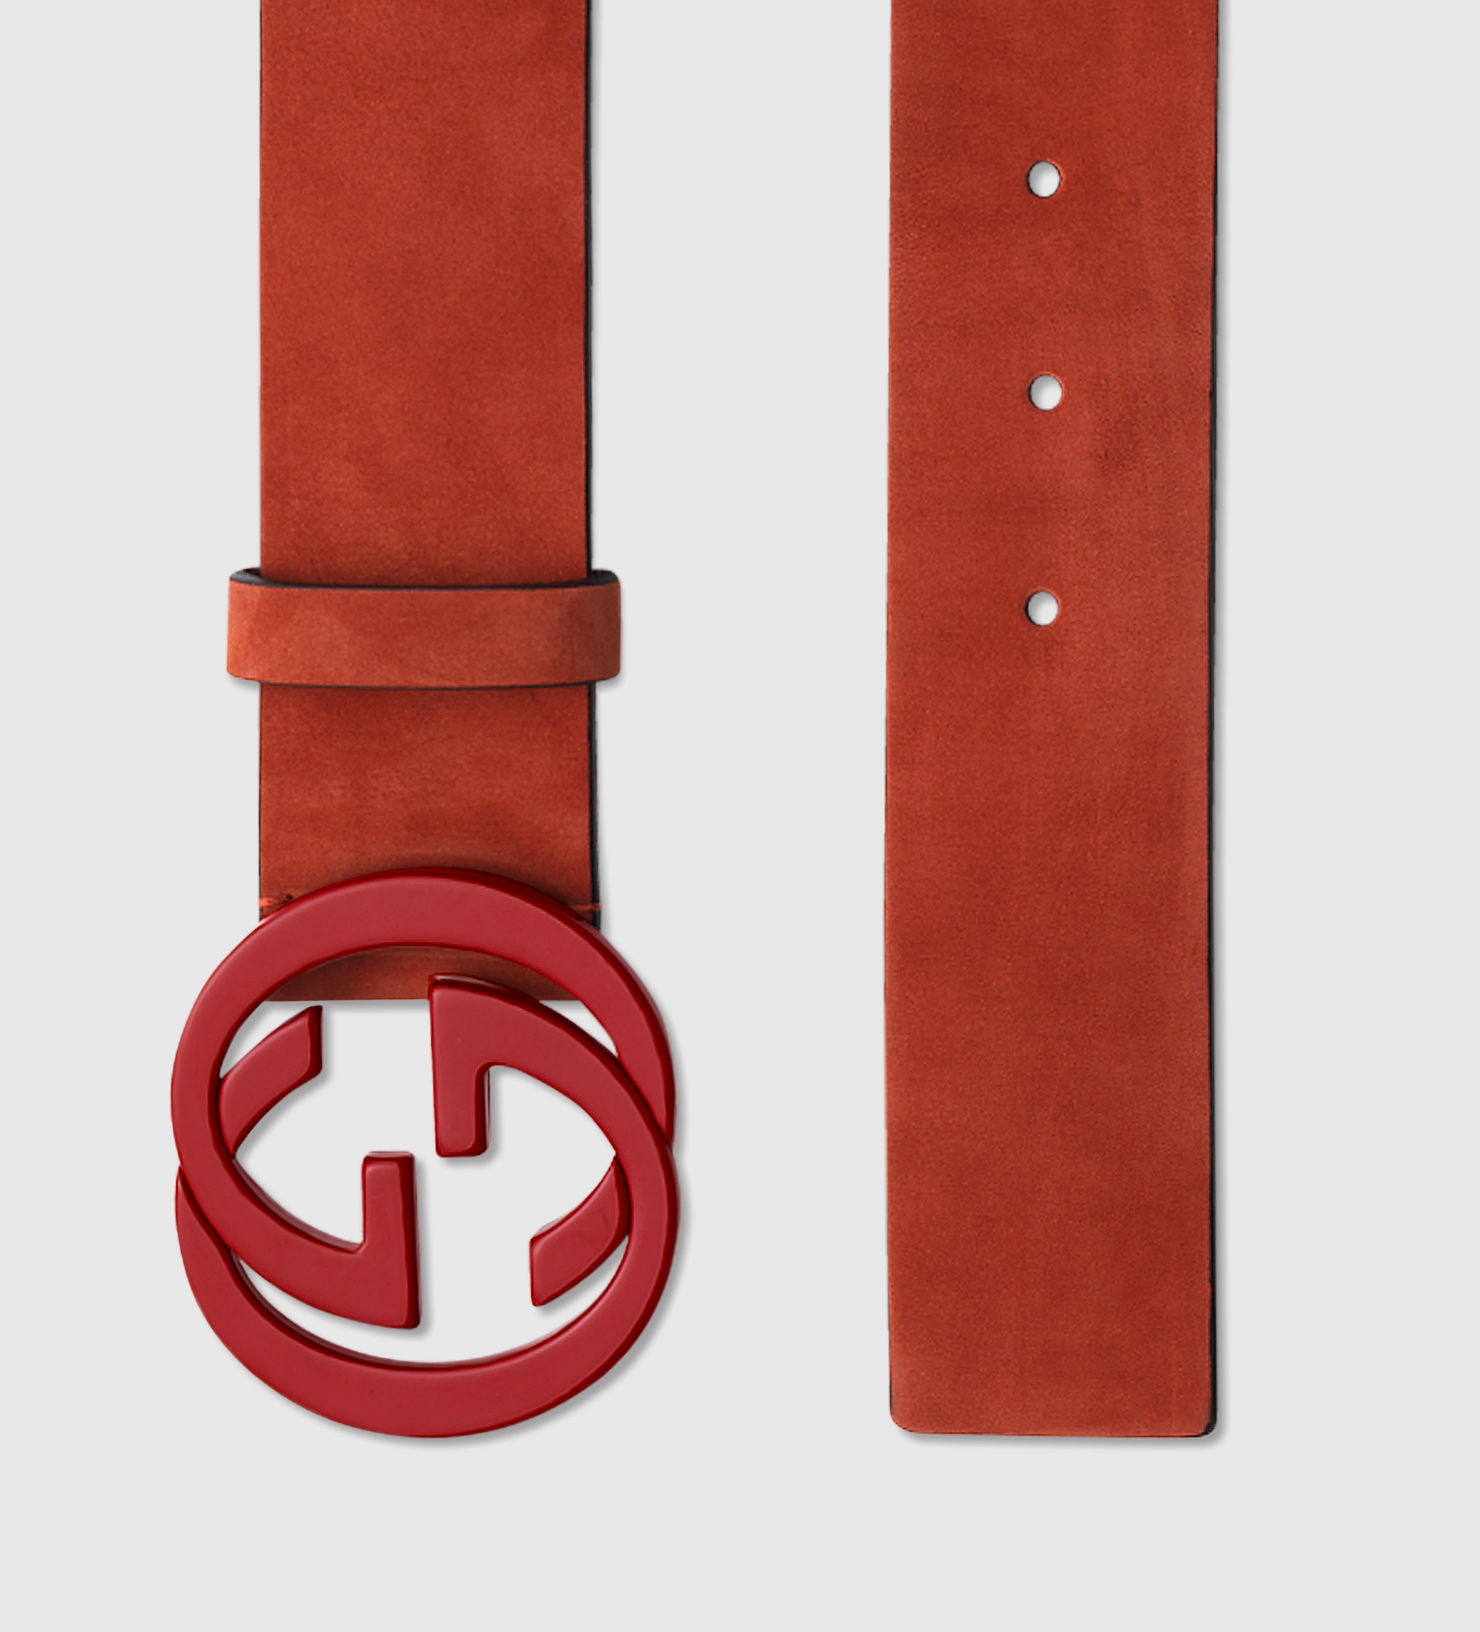 red on red gucci belt